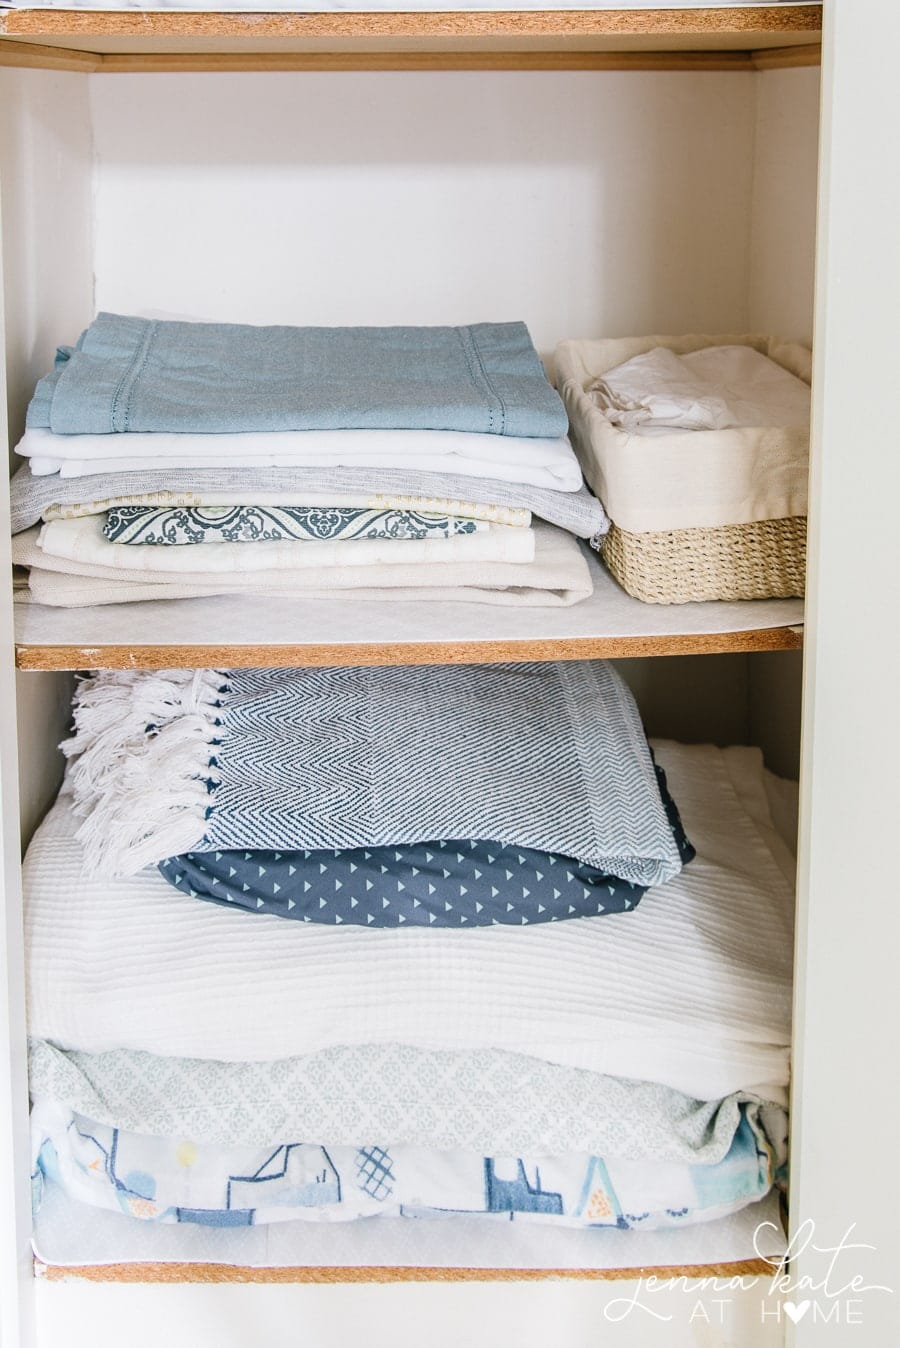 Sheets, pillowcases and other bedding on shelves of a linen closet